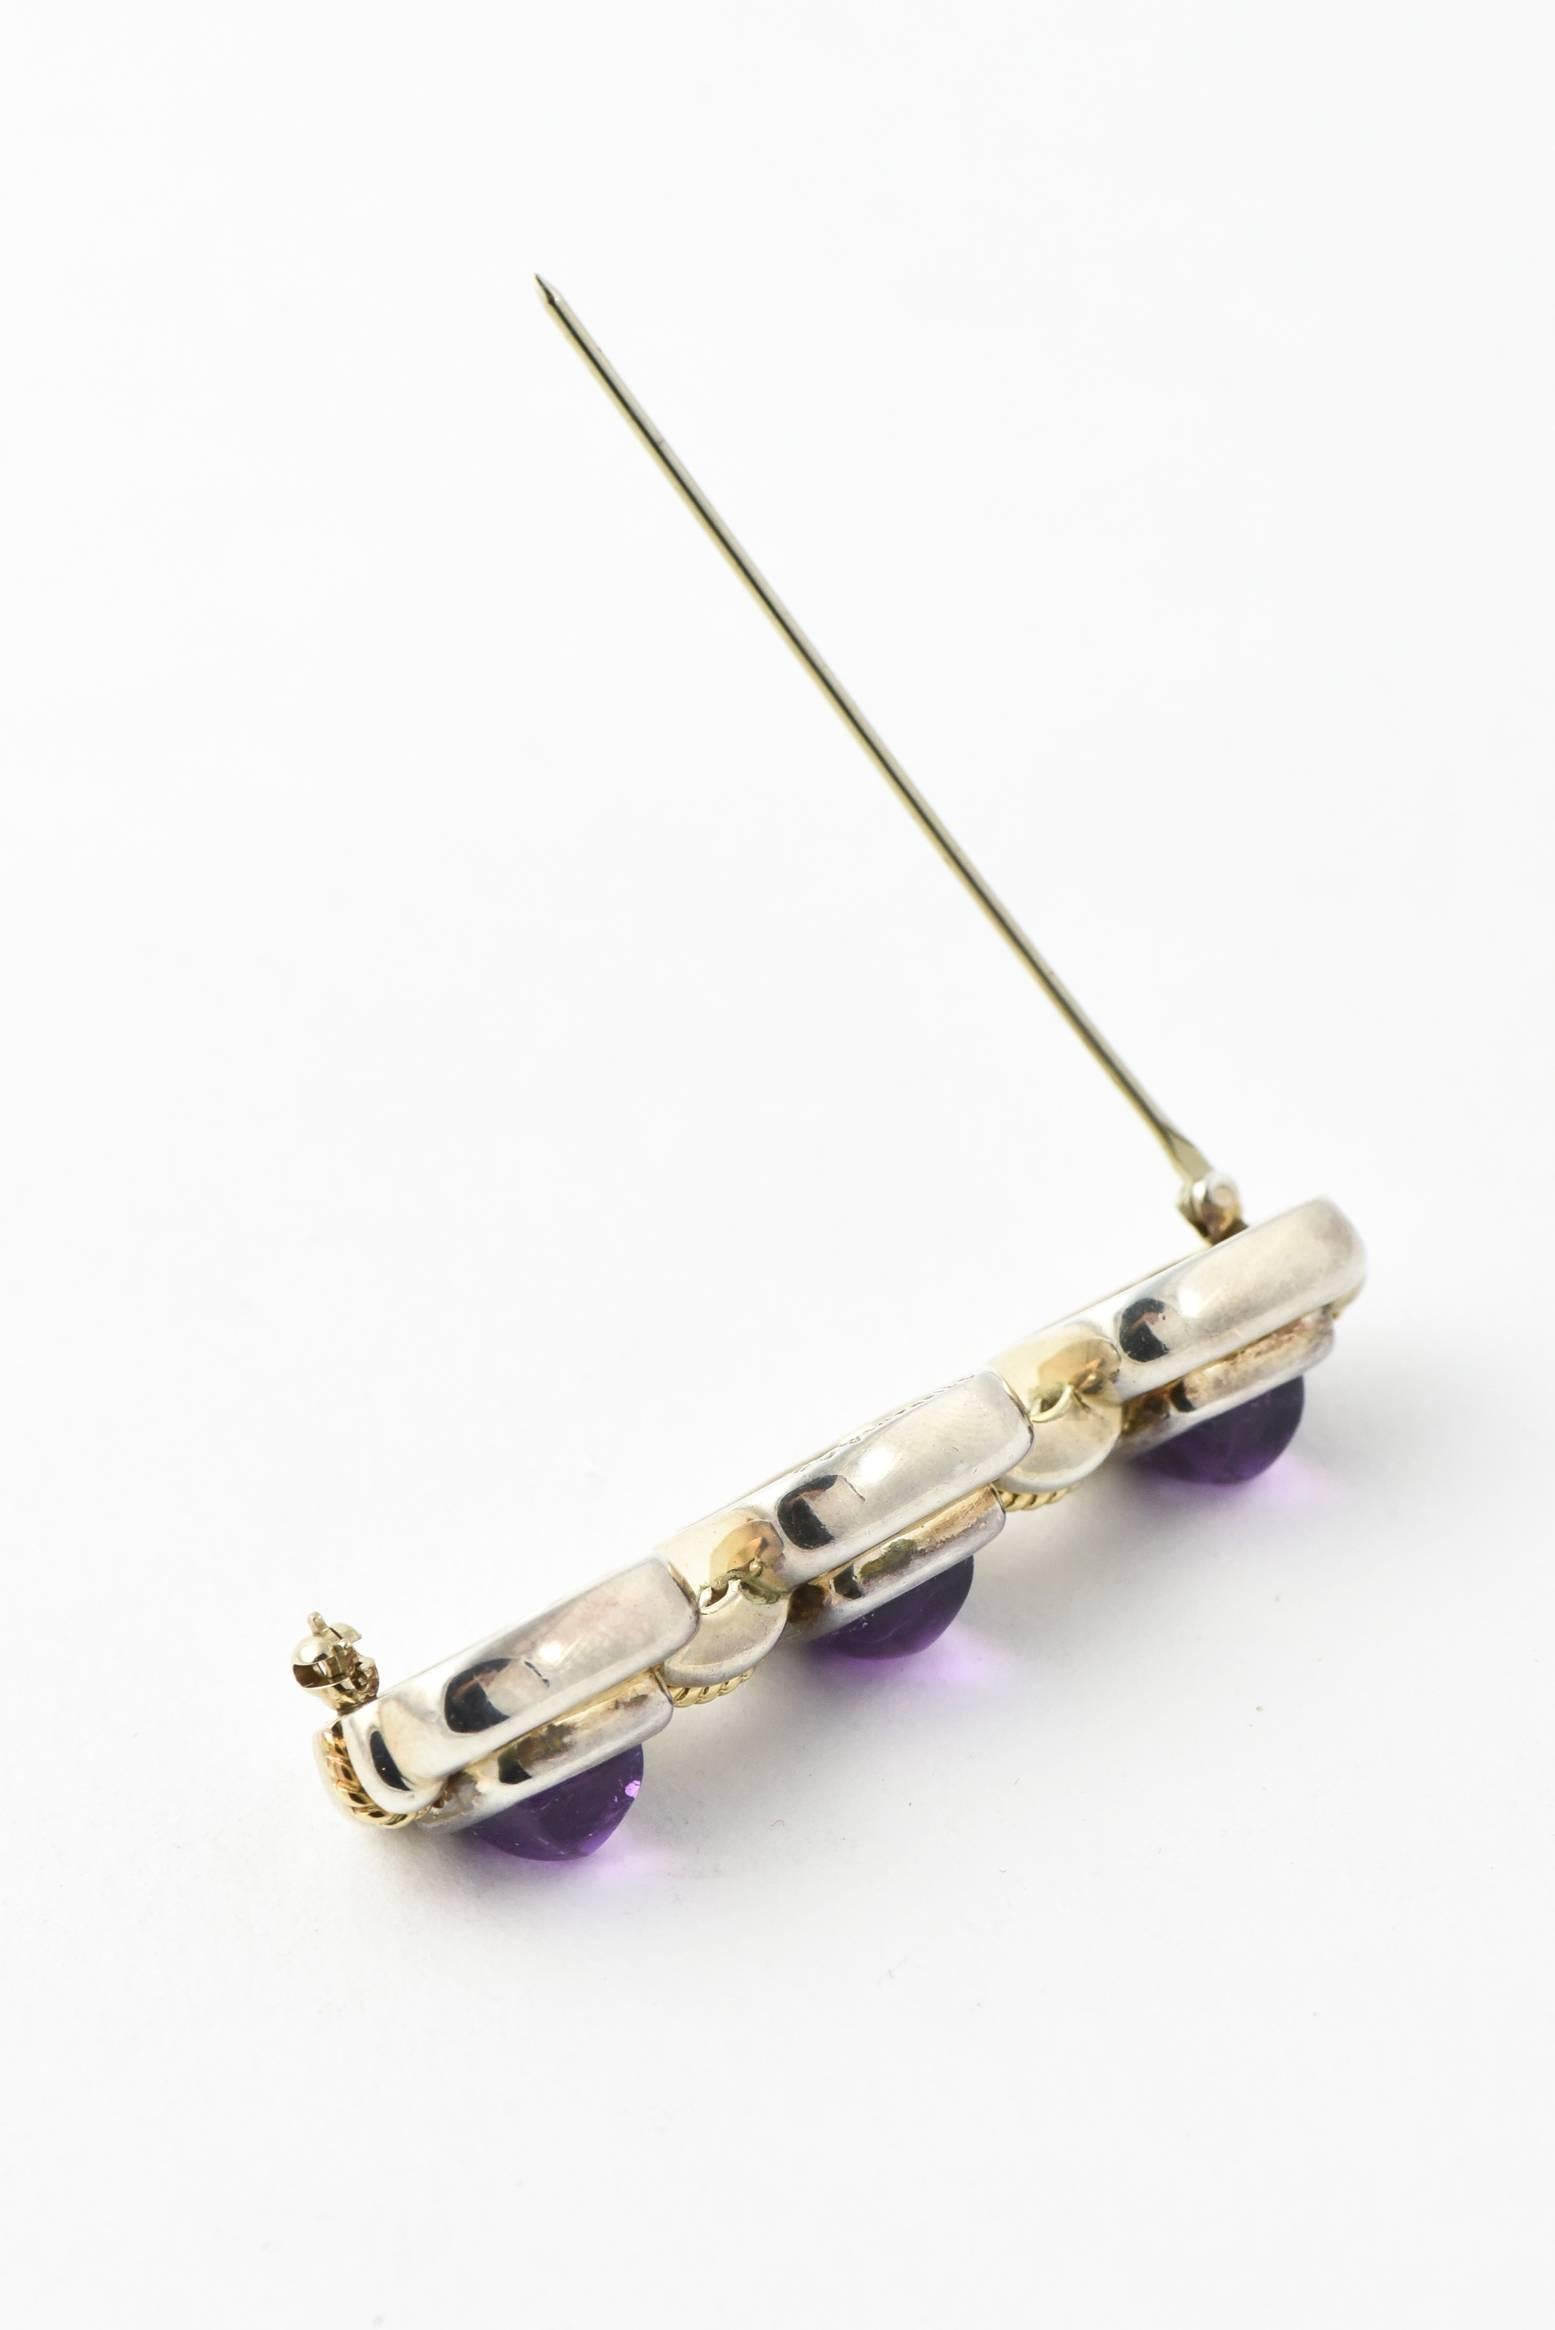 20th Century Tiffany & Co. sterling silver brooch with 2 dimensional square links with bezel set sugarloaf amethyst centers held together by sterling bridges with  18k gold rope accents down centers.

Marked Tiffany & Co. 925 750